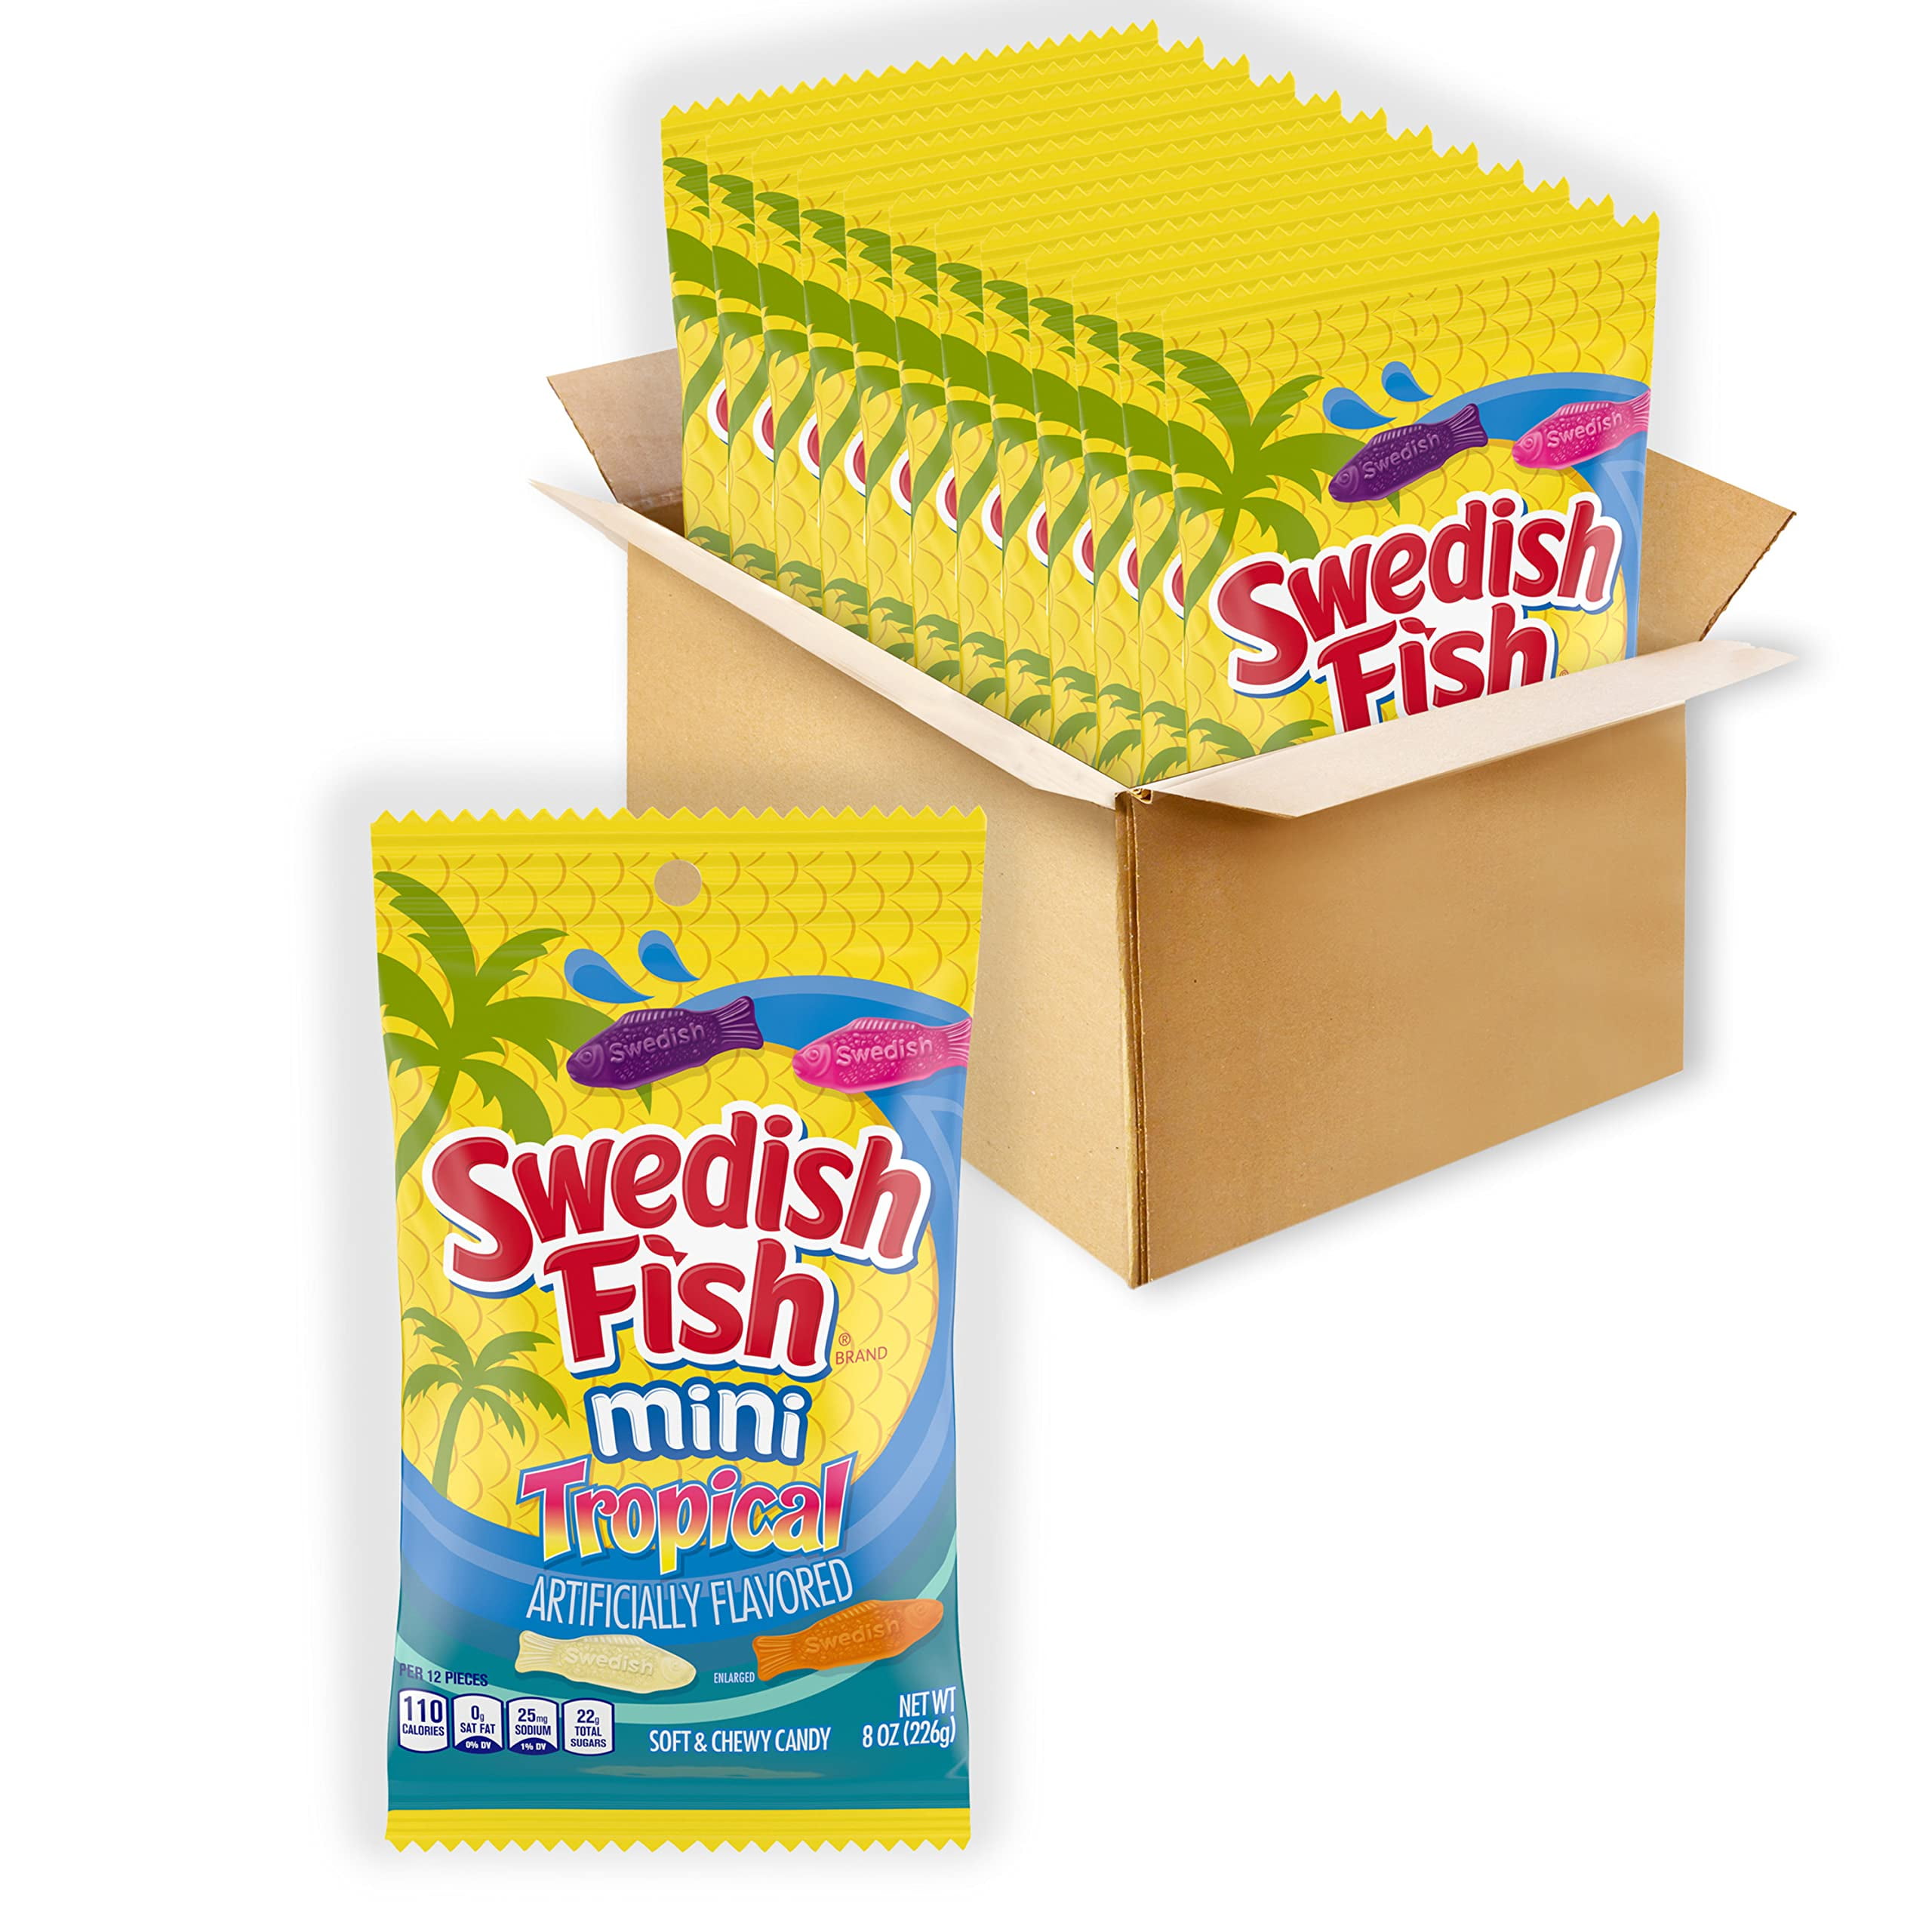 SWEDISH FISH Individually Wrapped Soft & Chewy Candy, Share Box